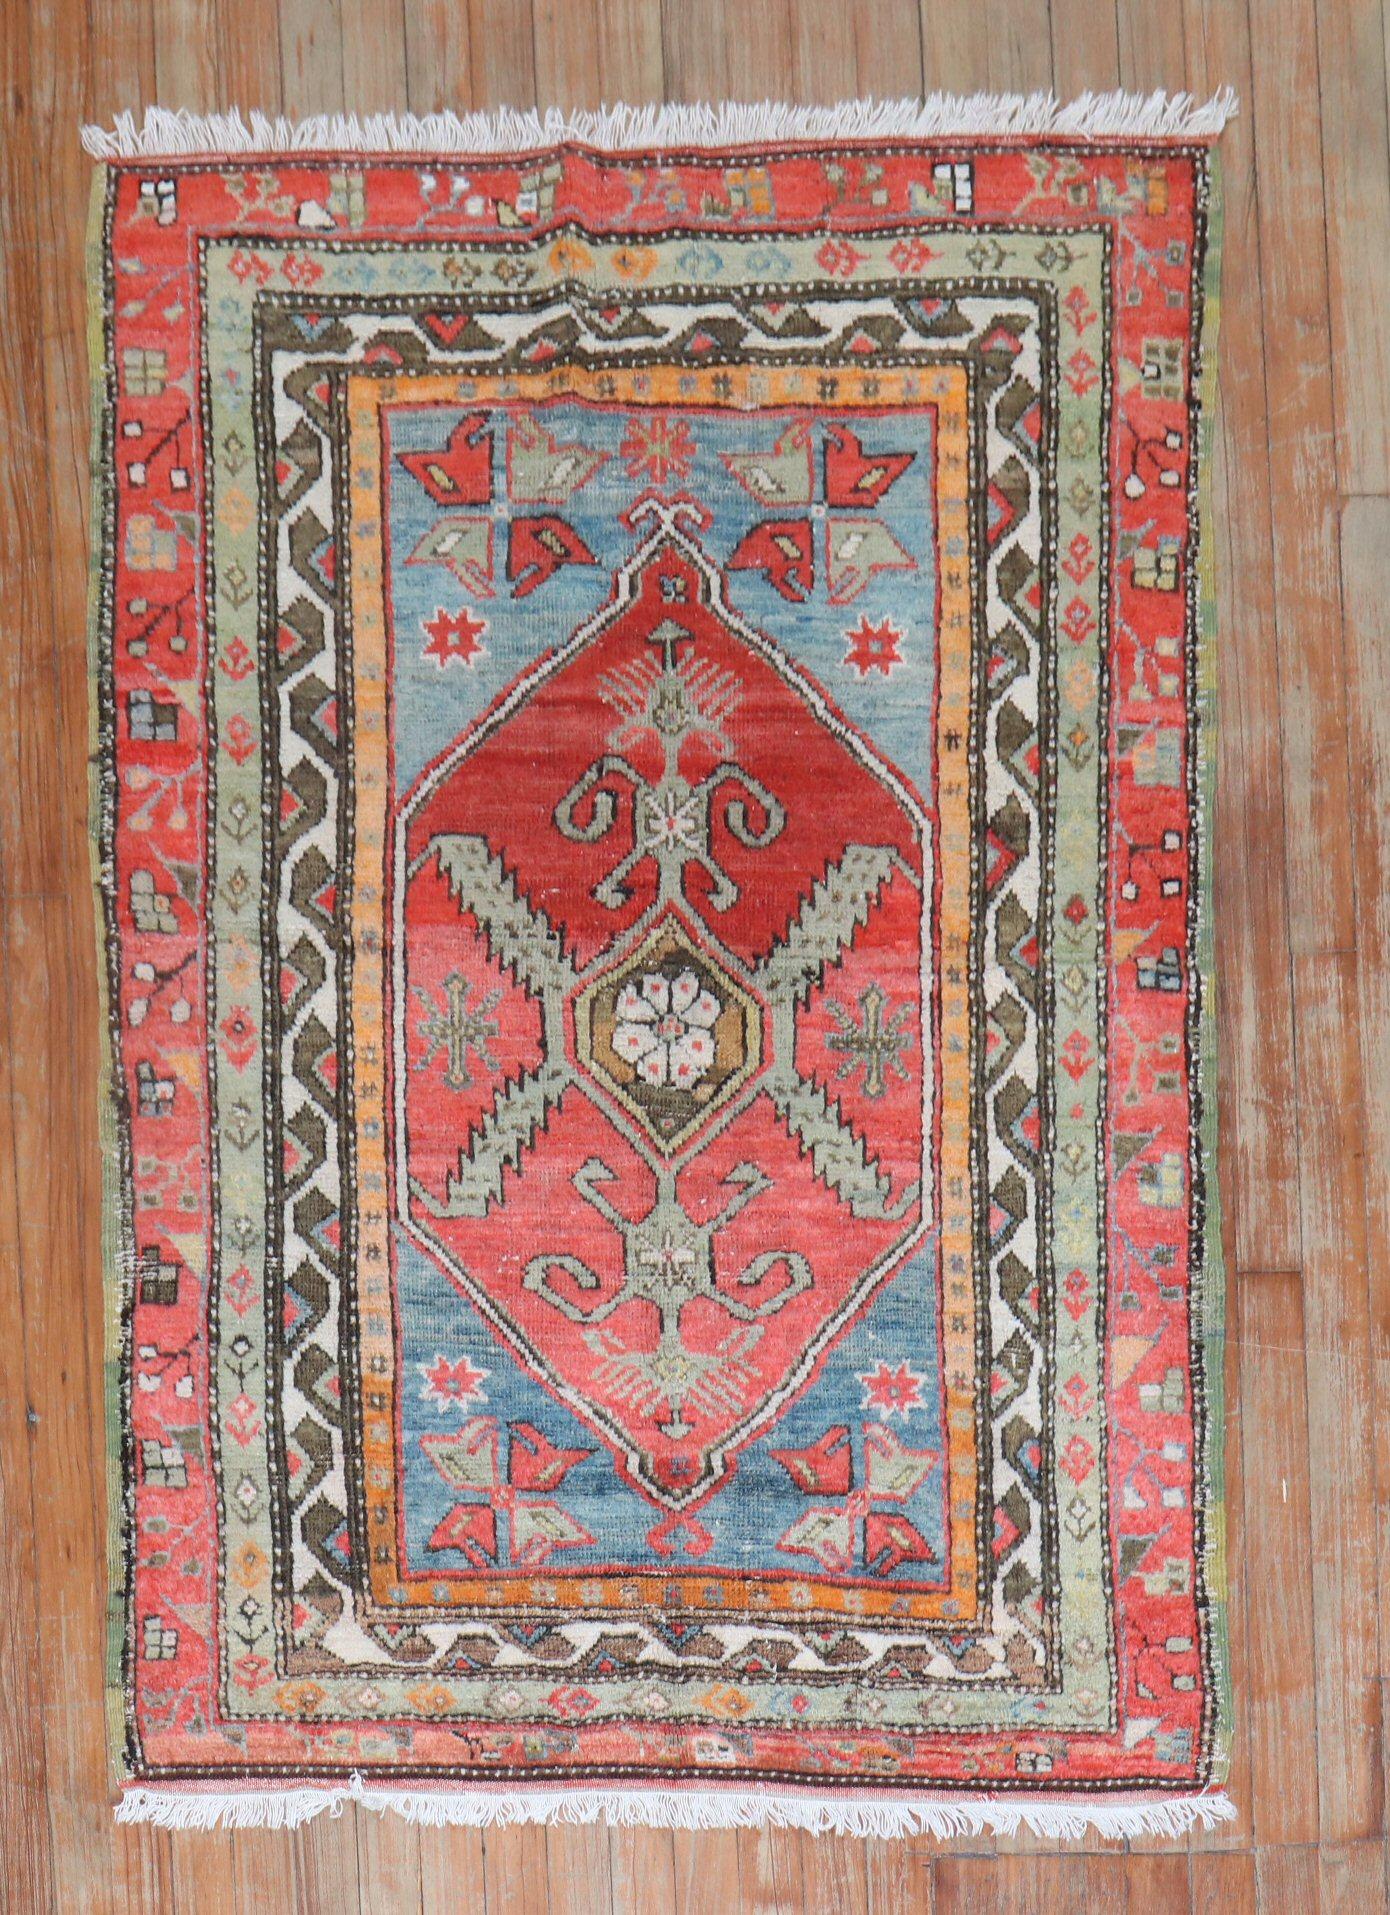 Quirky Antique Turkish Anatolian floral rug featuring vibrant colors.

Measures: 3'3'' x 4'10